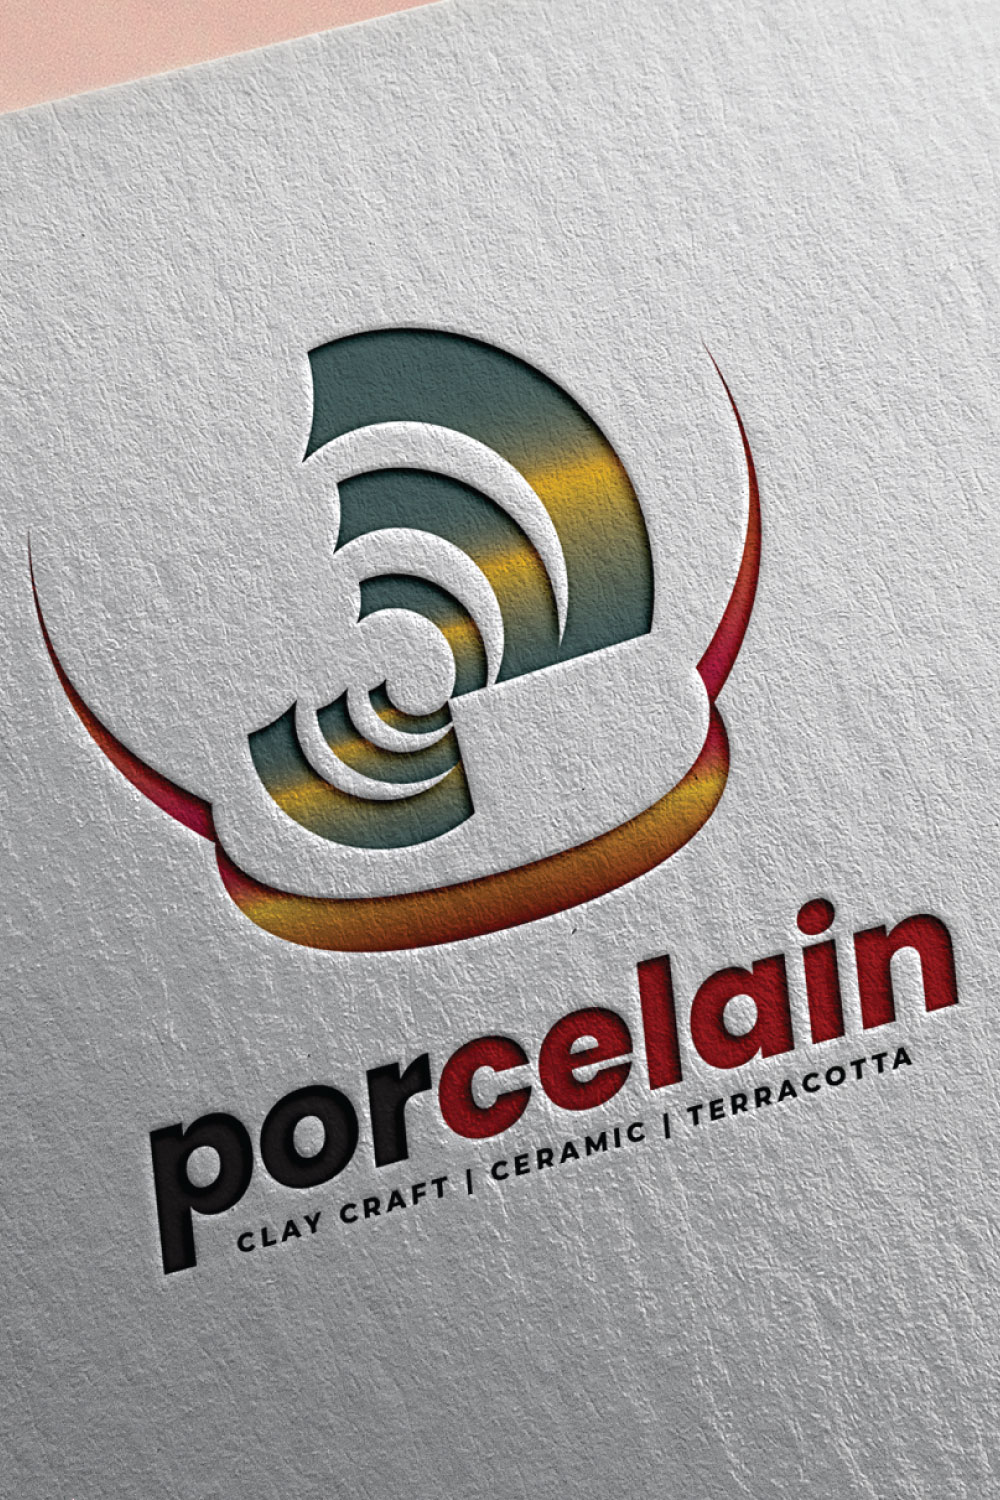 Clay Craft Terracotta and Ceramic Porcelain Logo pinterest preview image.